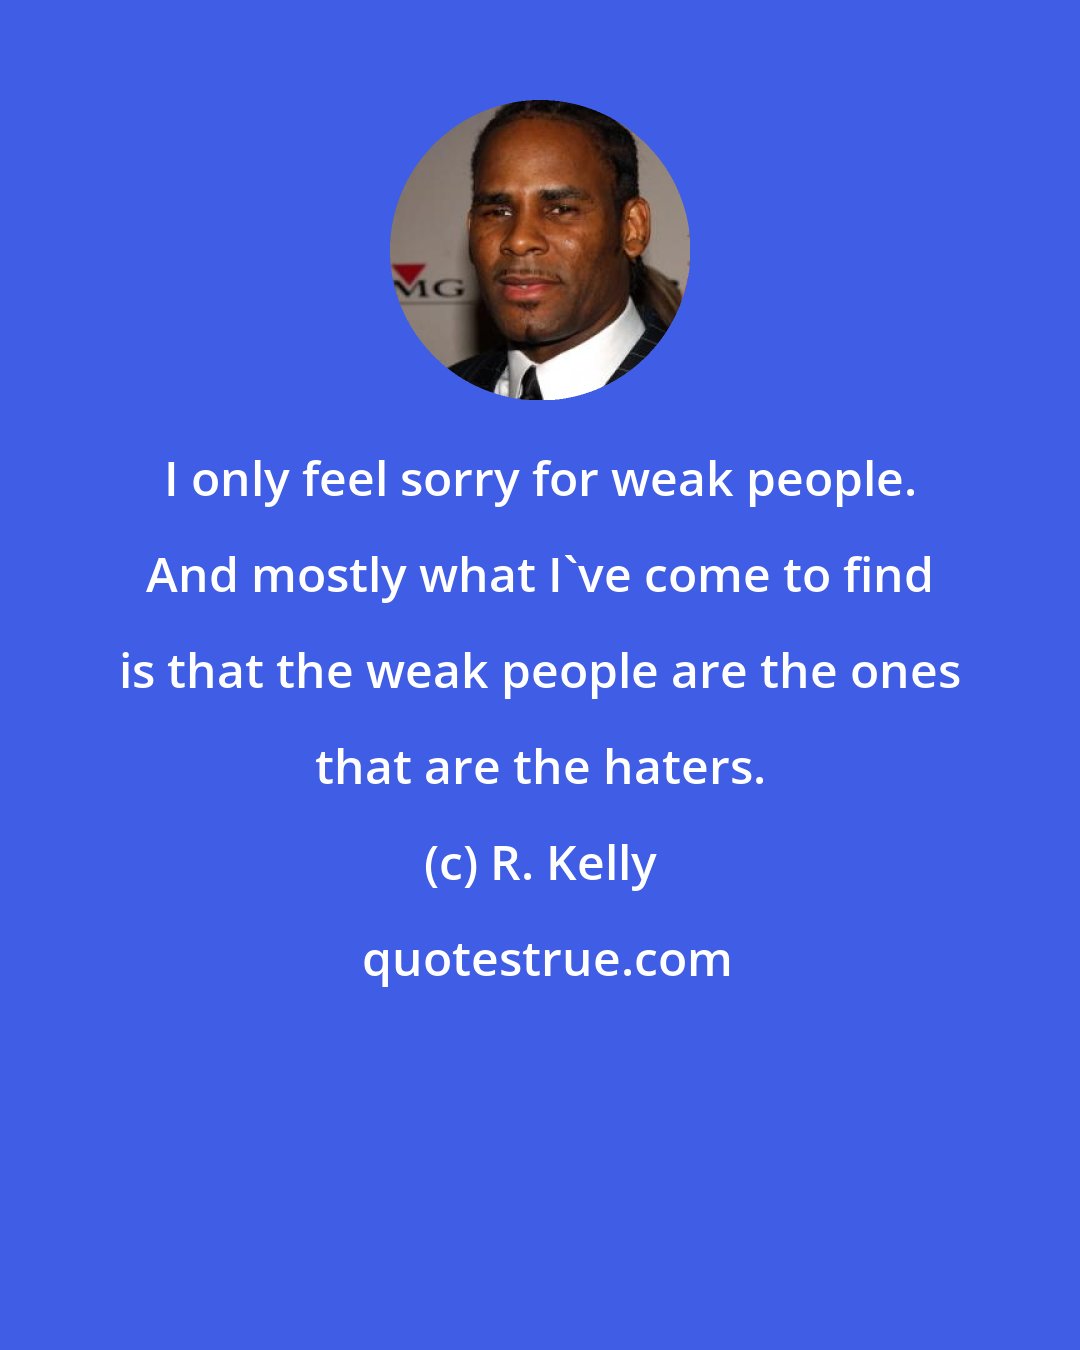 R. Kelly: I only feel sorry for weak people. And mostly what I've come to find is that the weak people are the ones that are the haters.